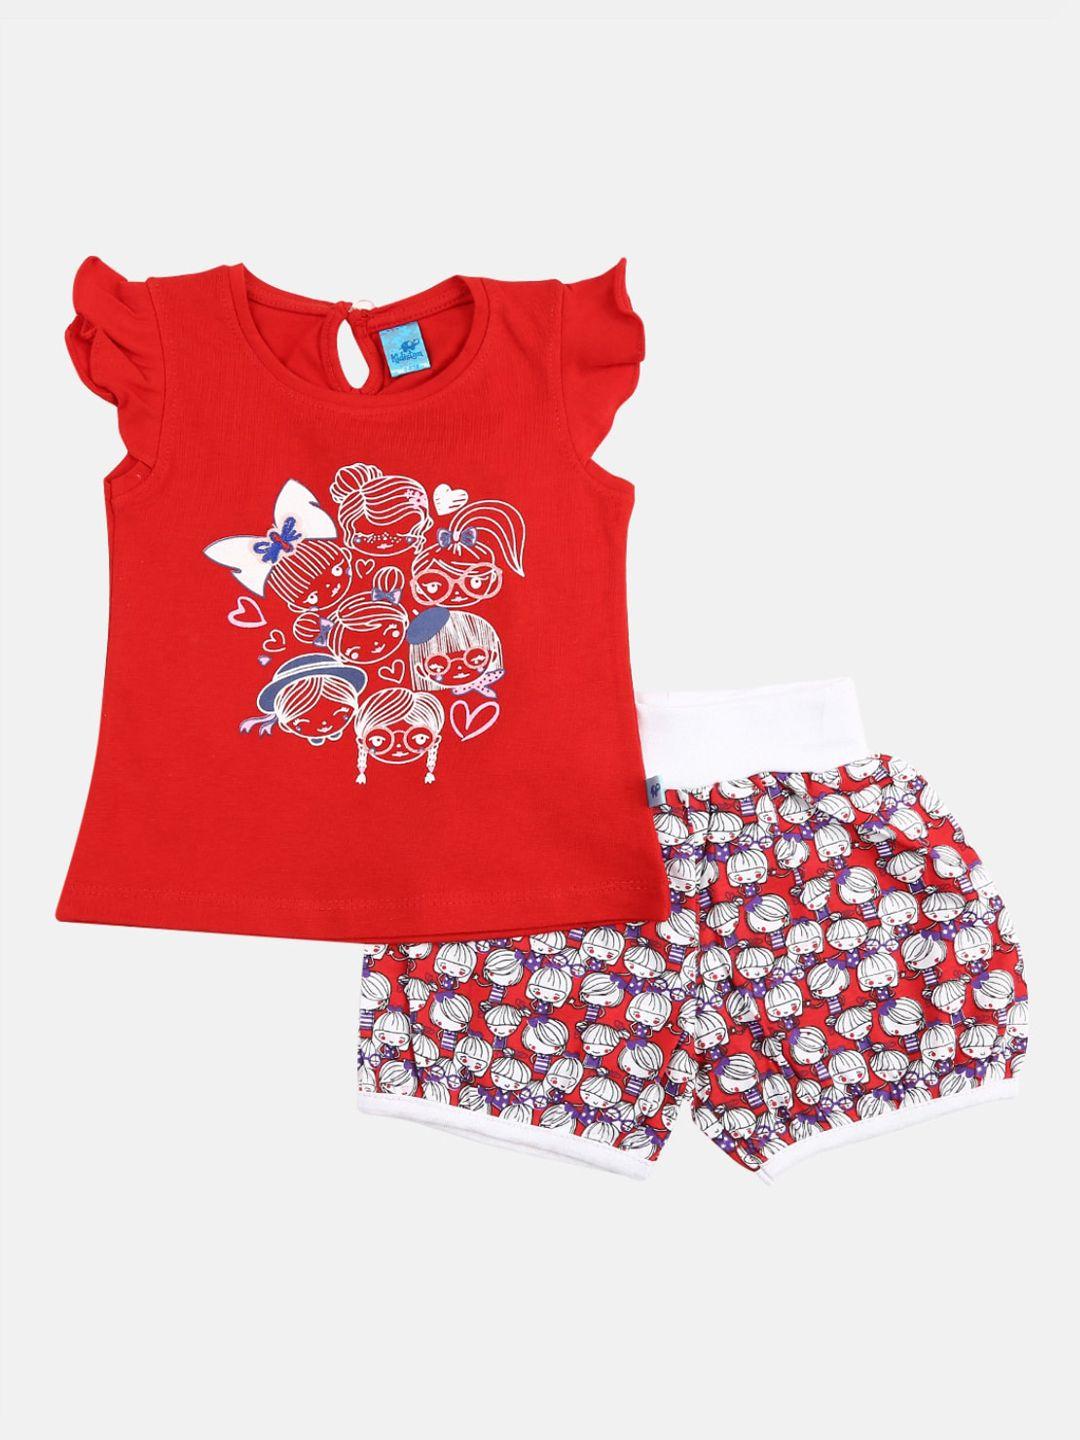 v-mart unisex kids red & white printed cotton t-shirt with shorts